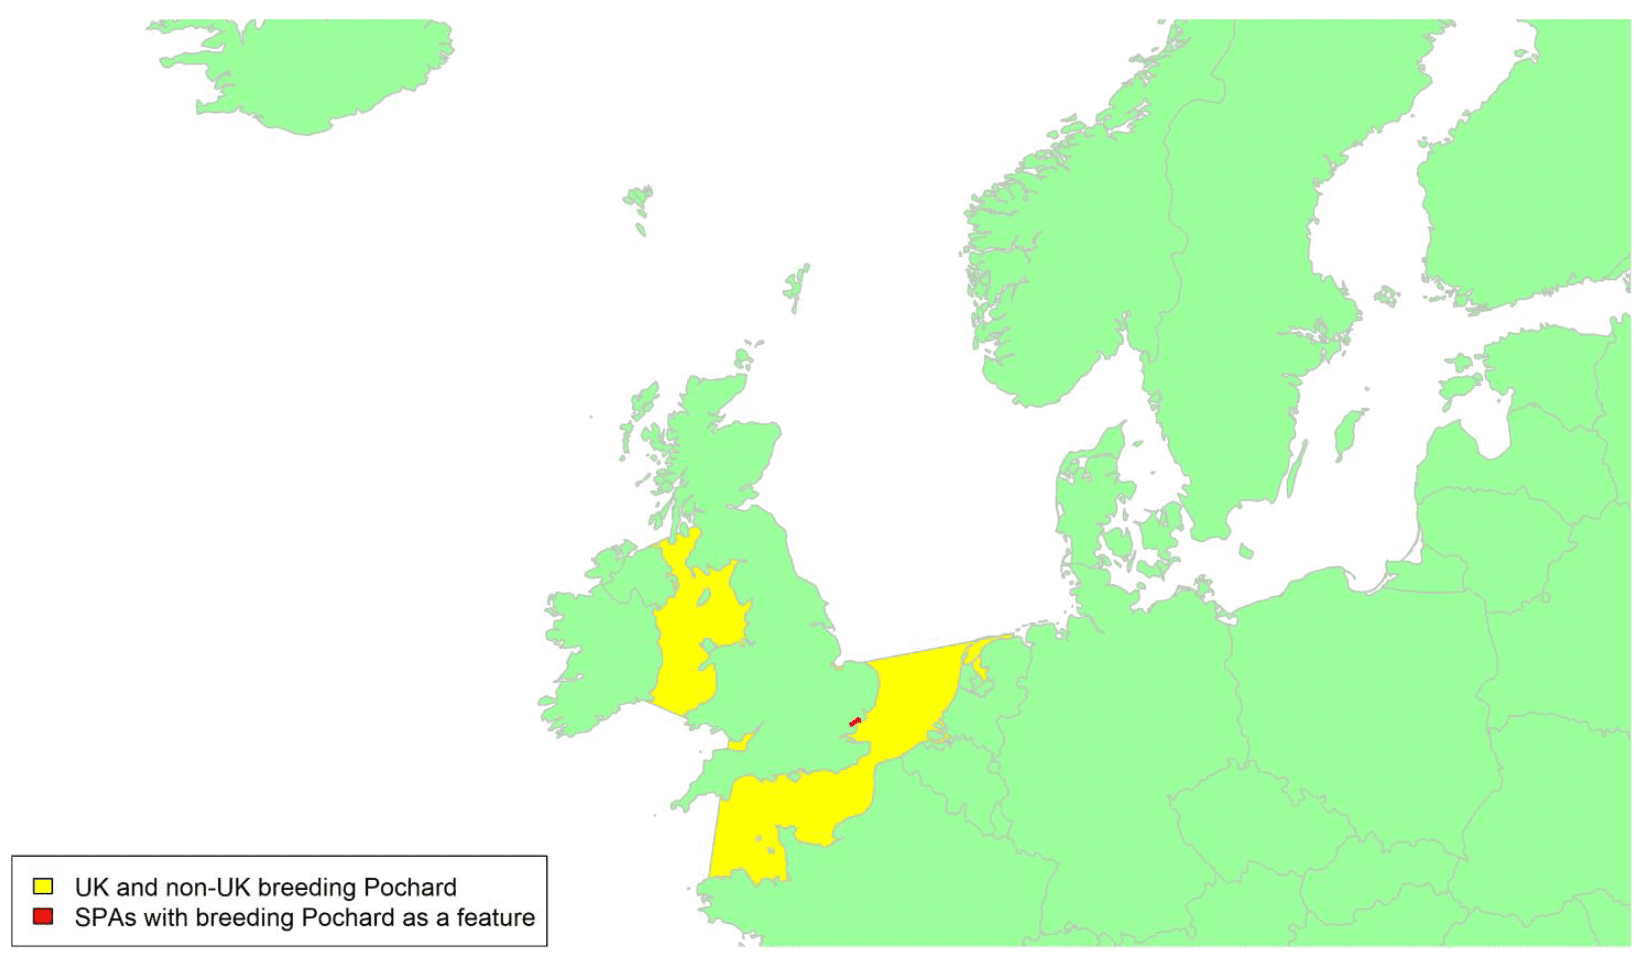 Map of North West Europe showing migratory routes and SPAs within the UK for breeding Pochard as described in the text below.